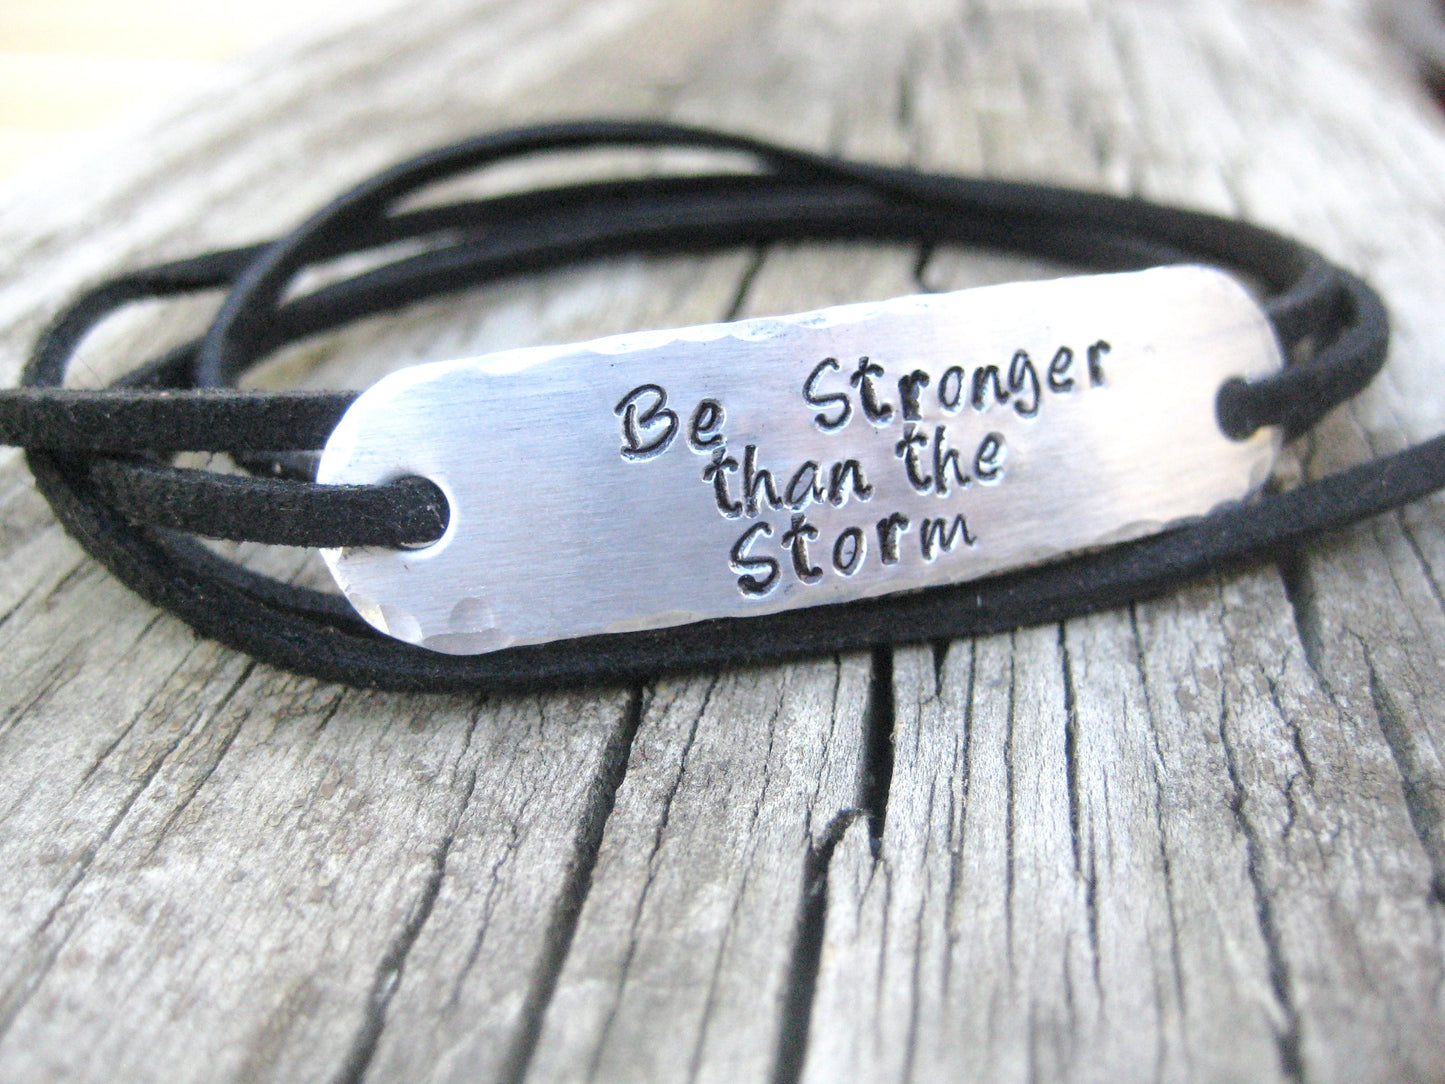 PERSONALIZED BRACELET WRAP - Be Stronger Than the Storm, Hand Stamped, Bracelet Wrap, Encouragement gift,  with suede cord